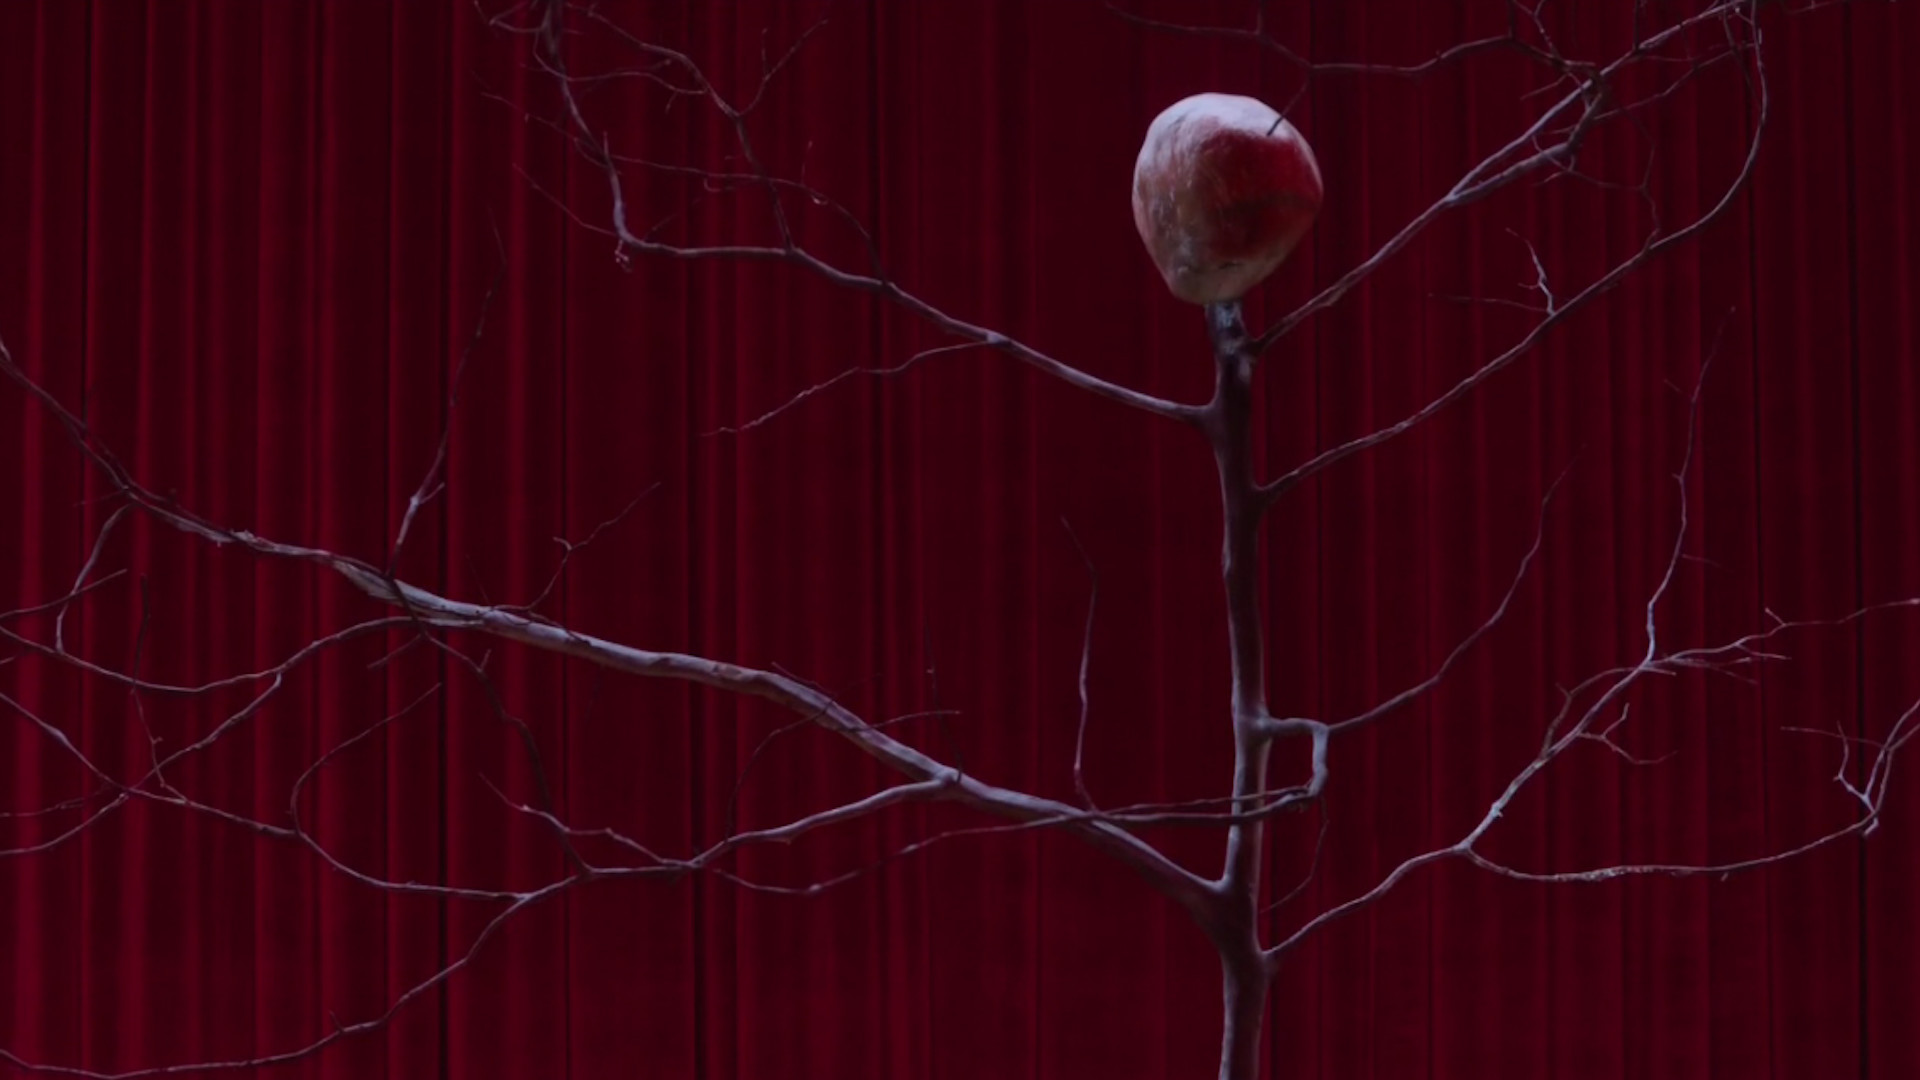 1920x1080 Twin Peaks images Season 3 Promotional Photo HD wallpaper and .